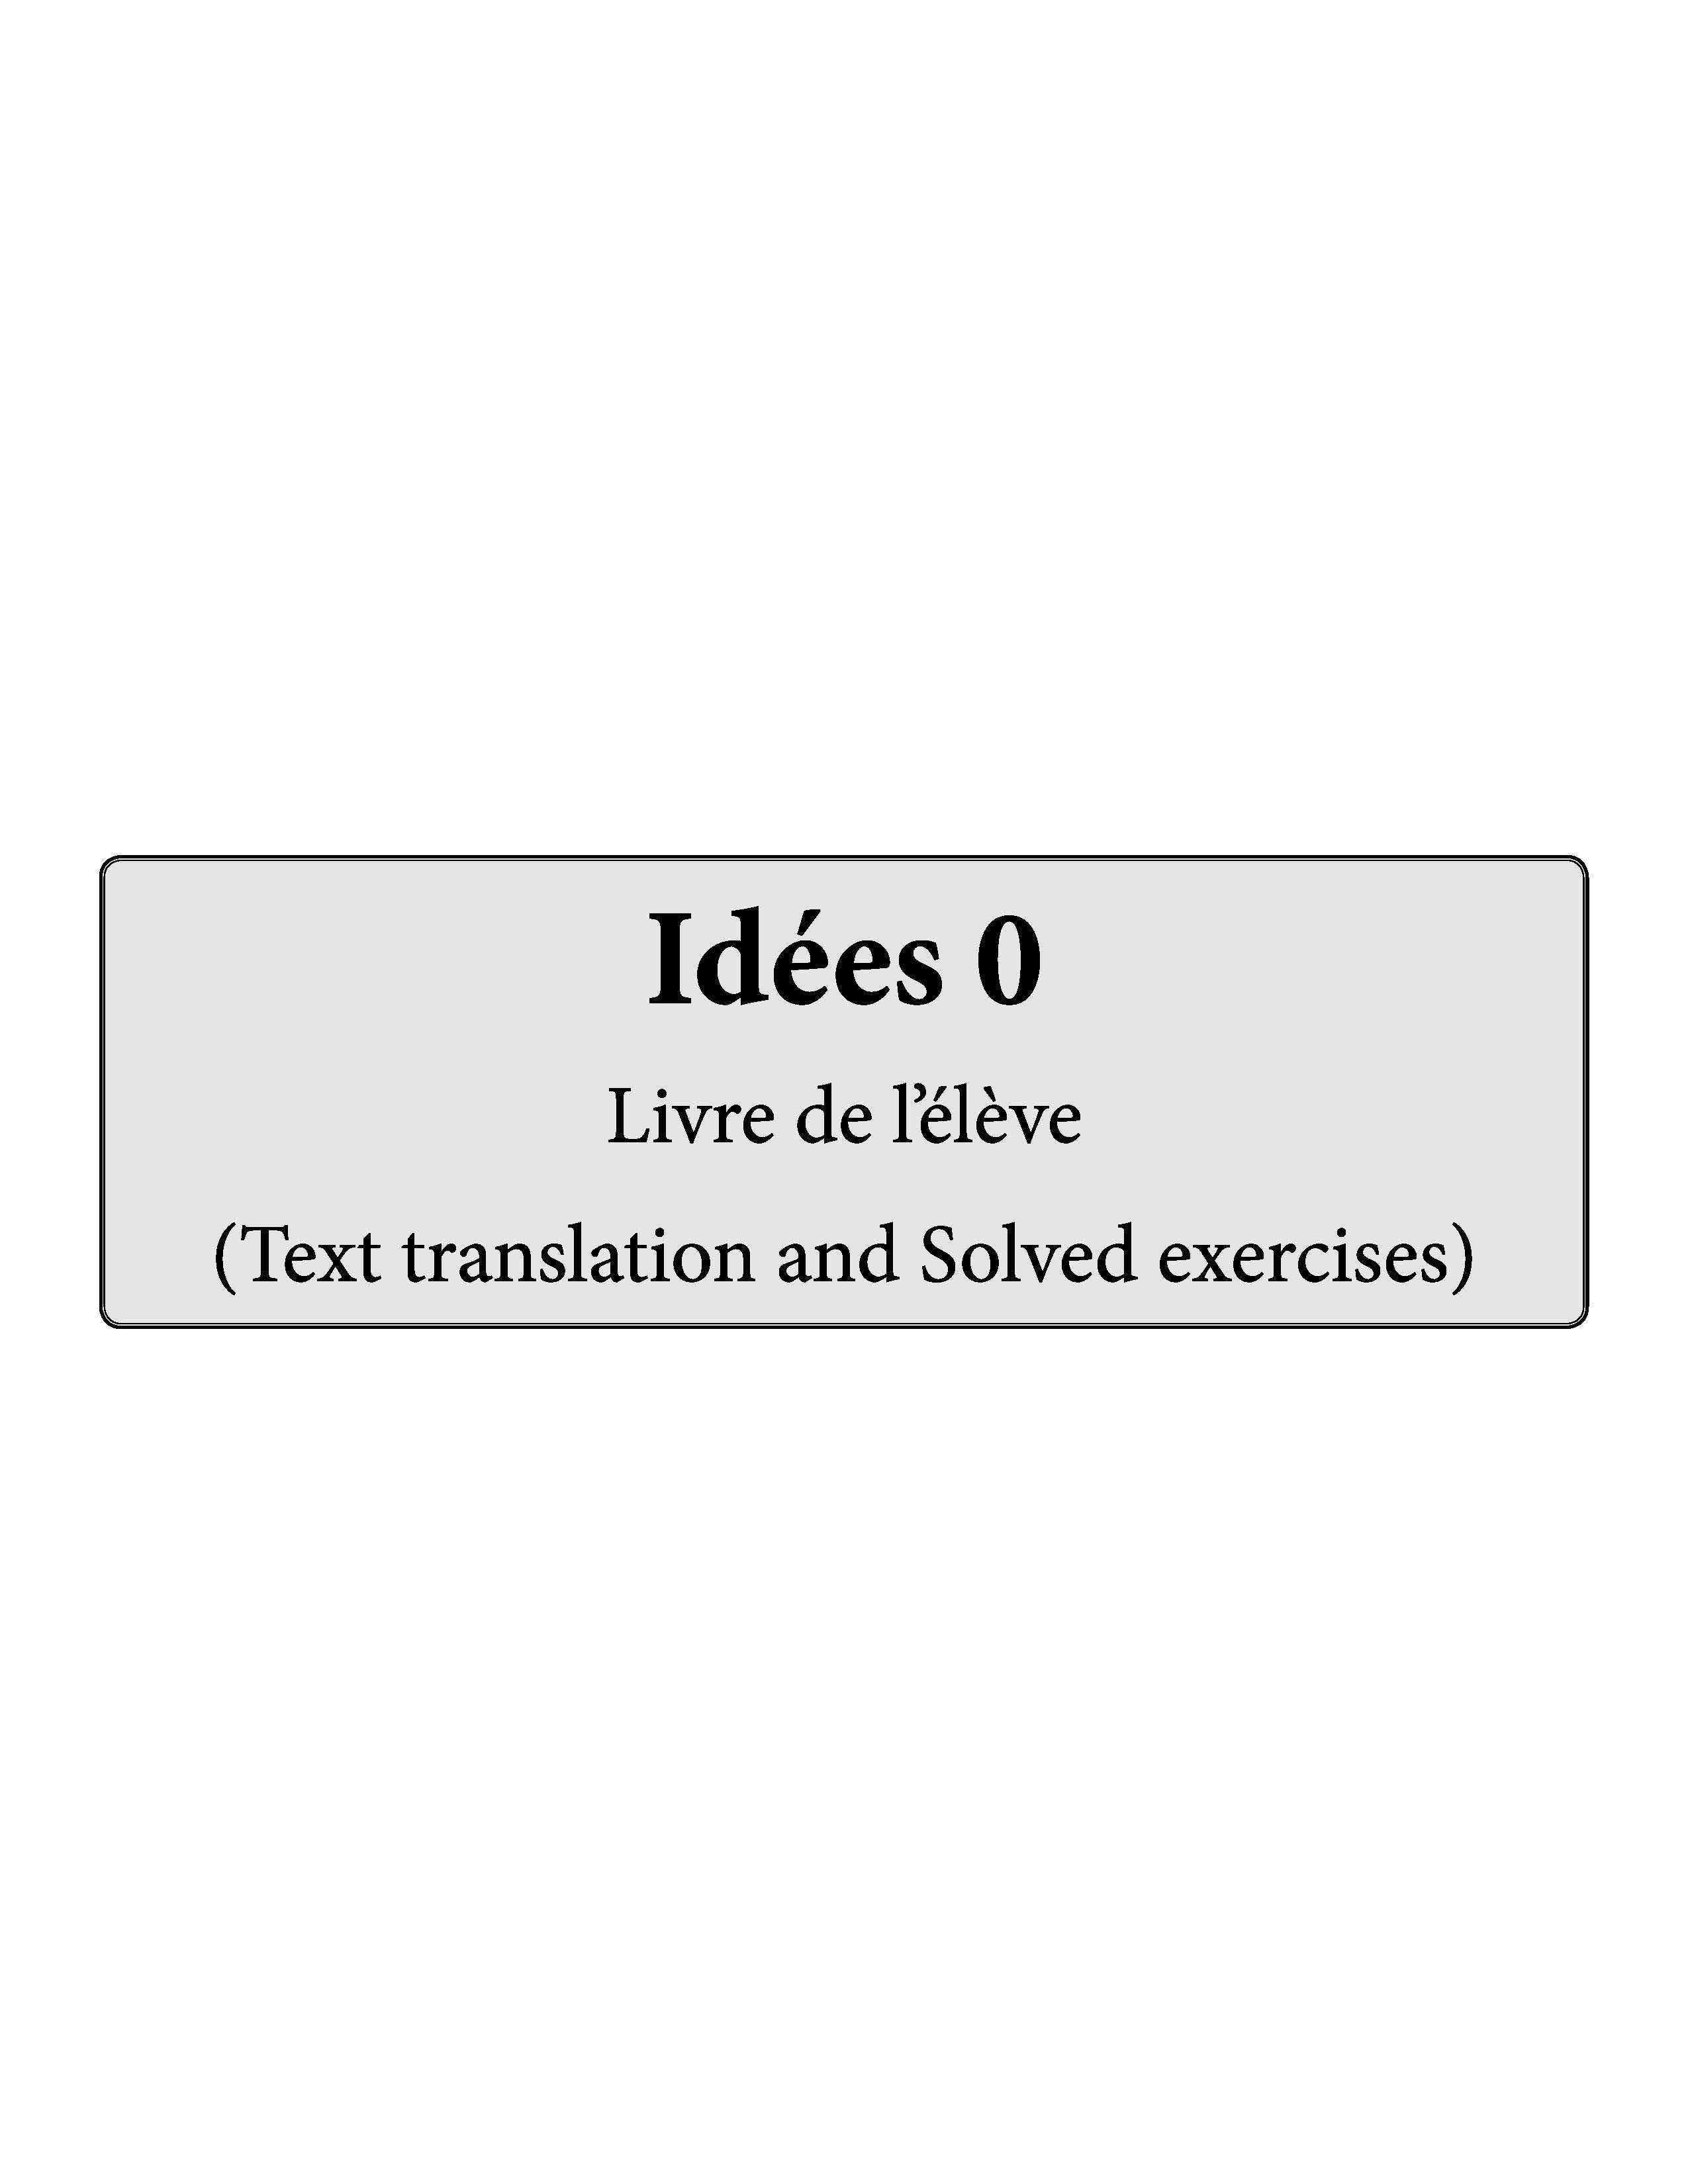 Idées Complete Study Material 0 (For Class 5) Text Translation